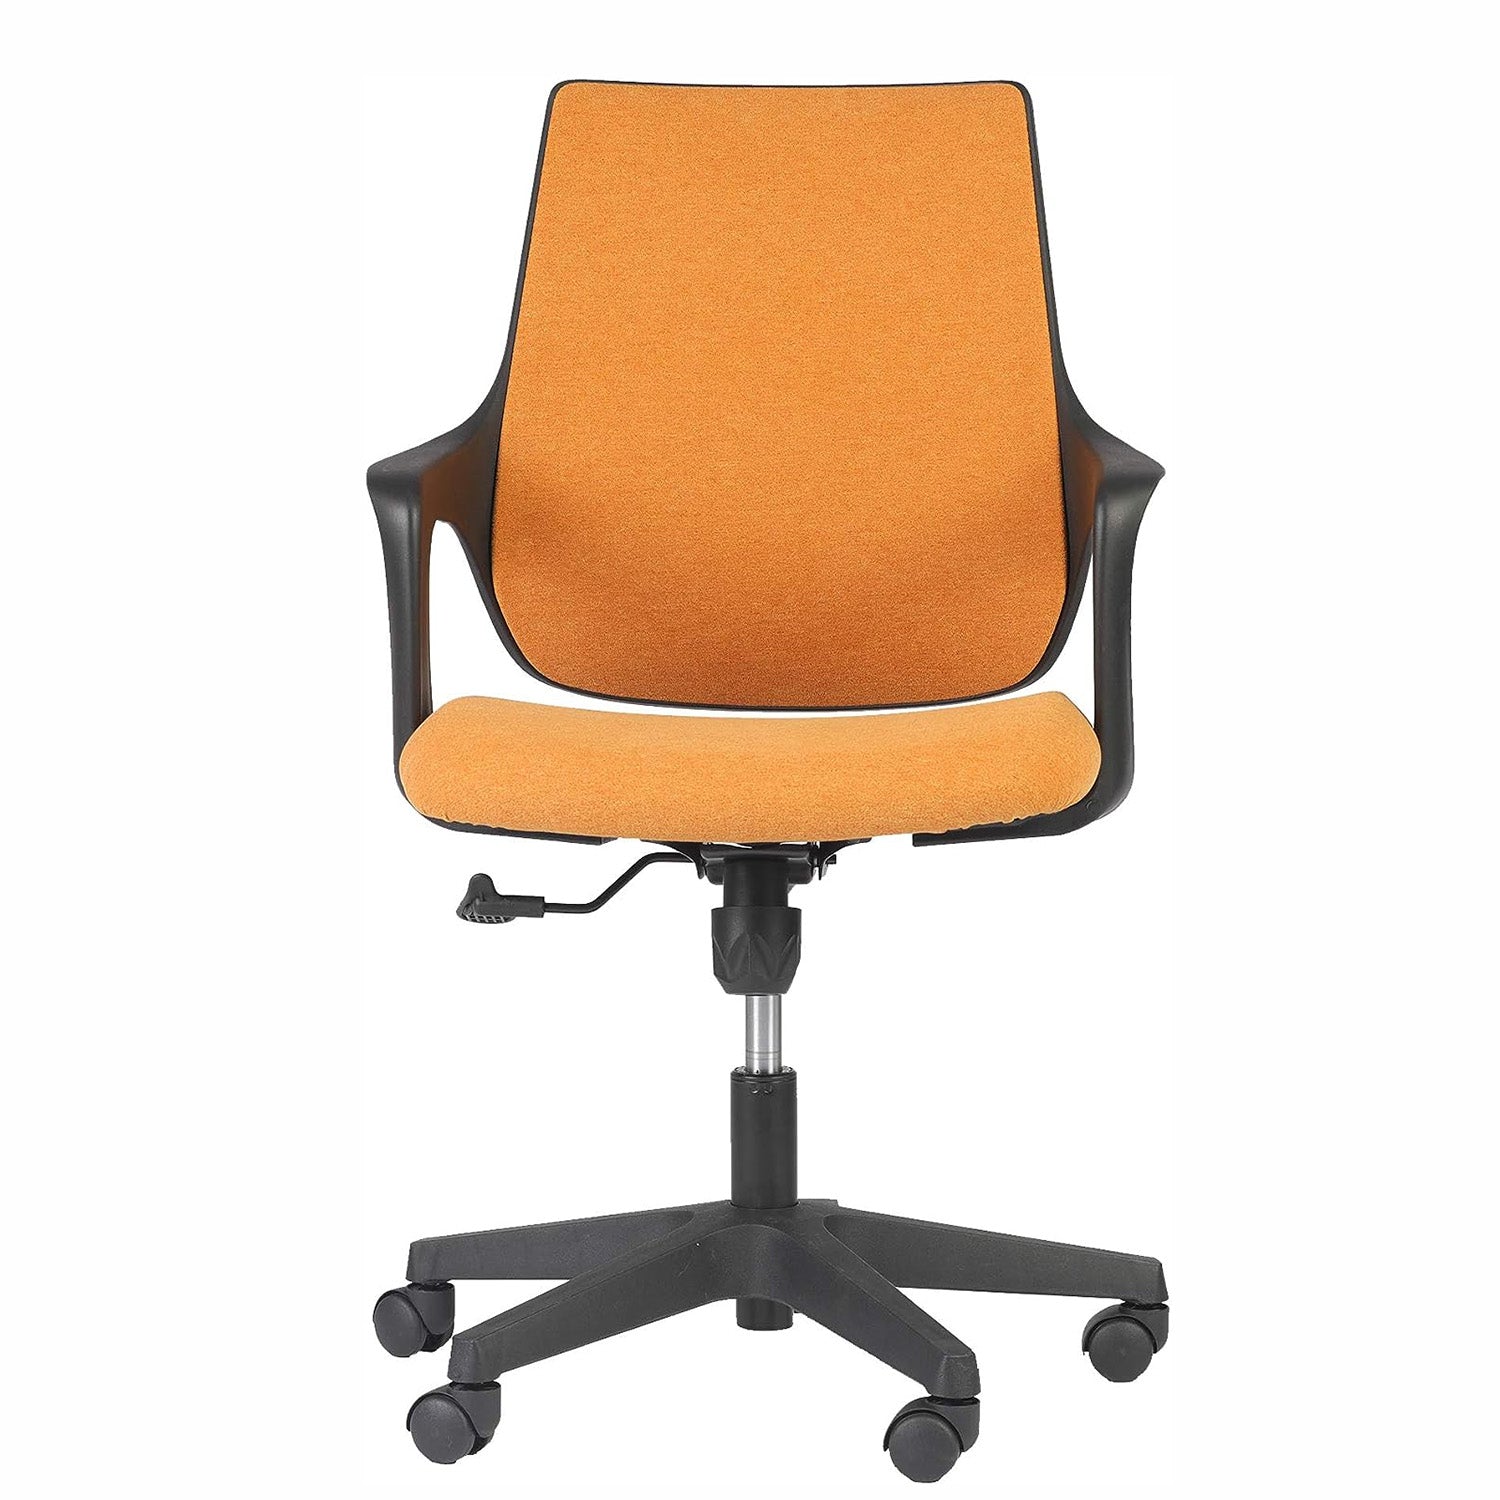 Height Adjustable Swivel Ergonomic Office Desk Chair with Cuddle Back and Padded Seat, Orange